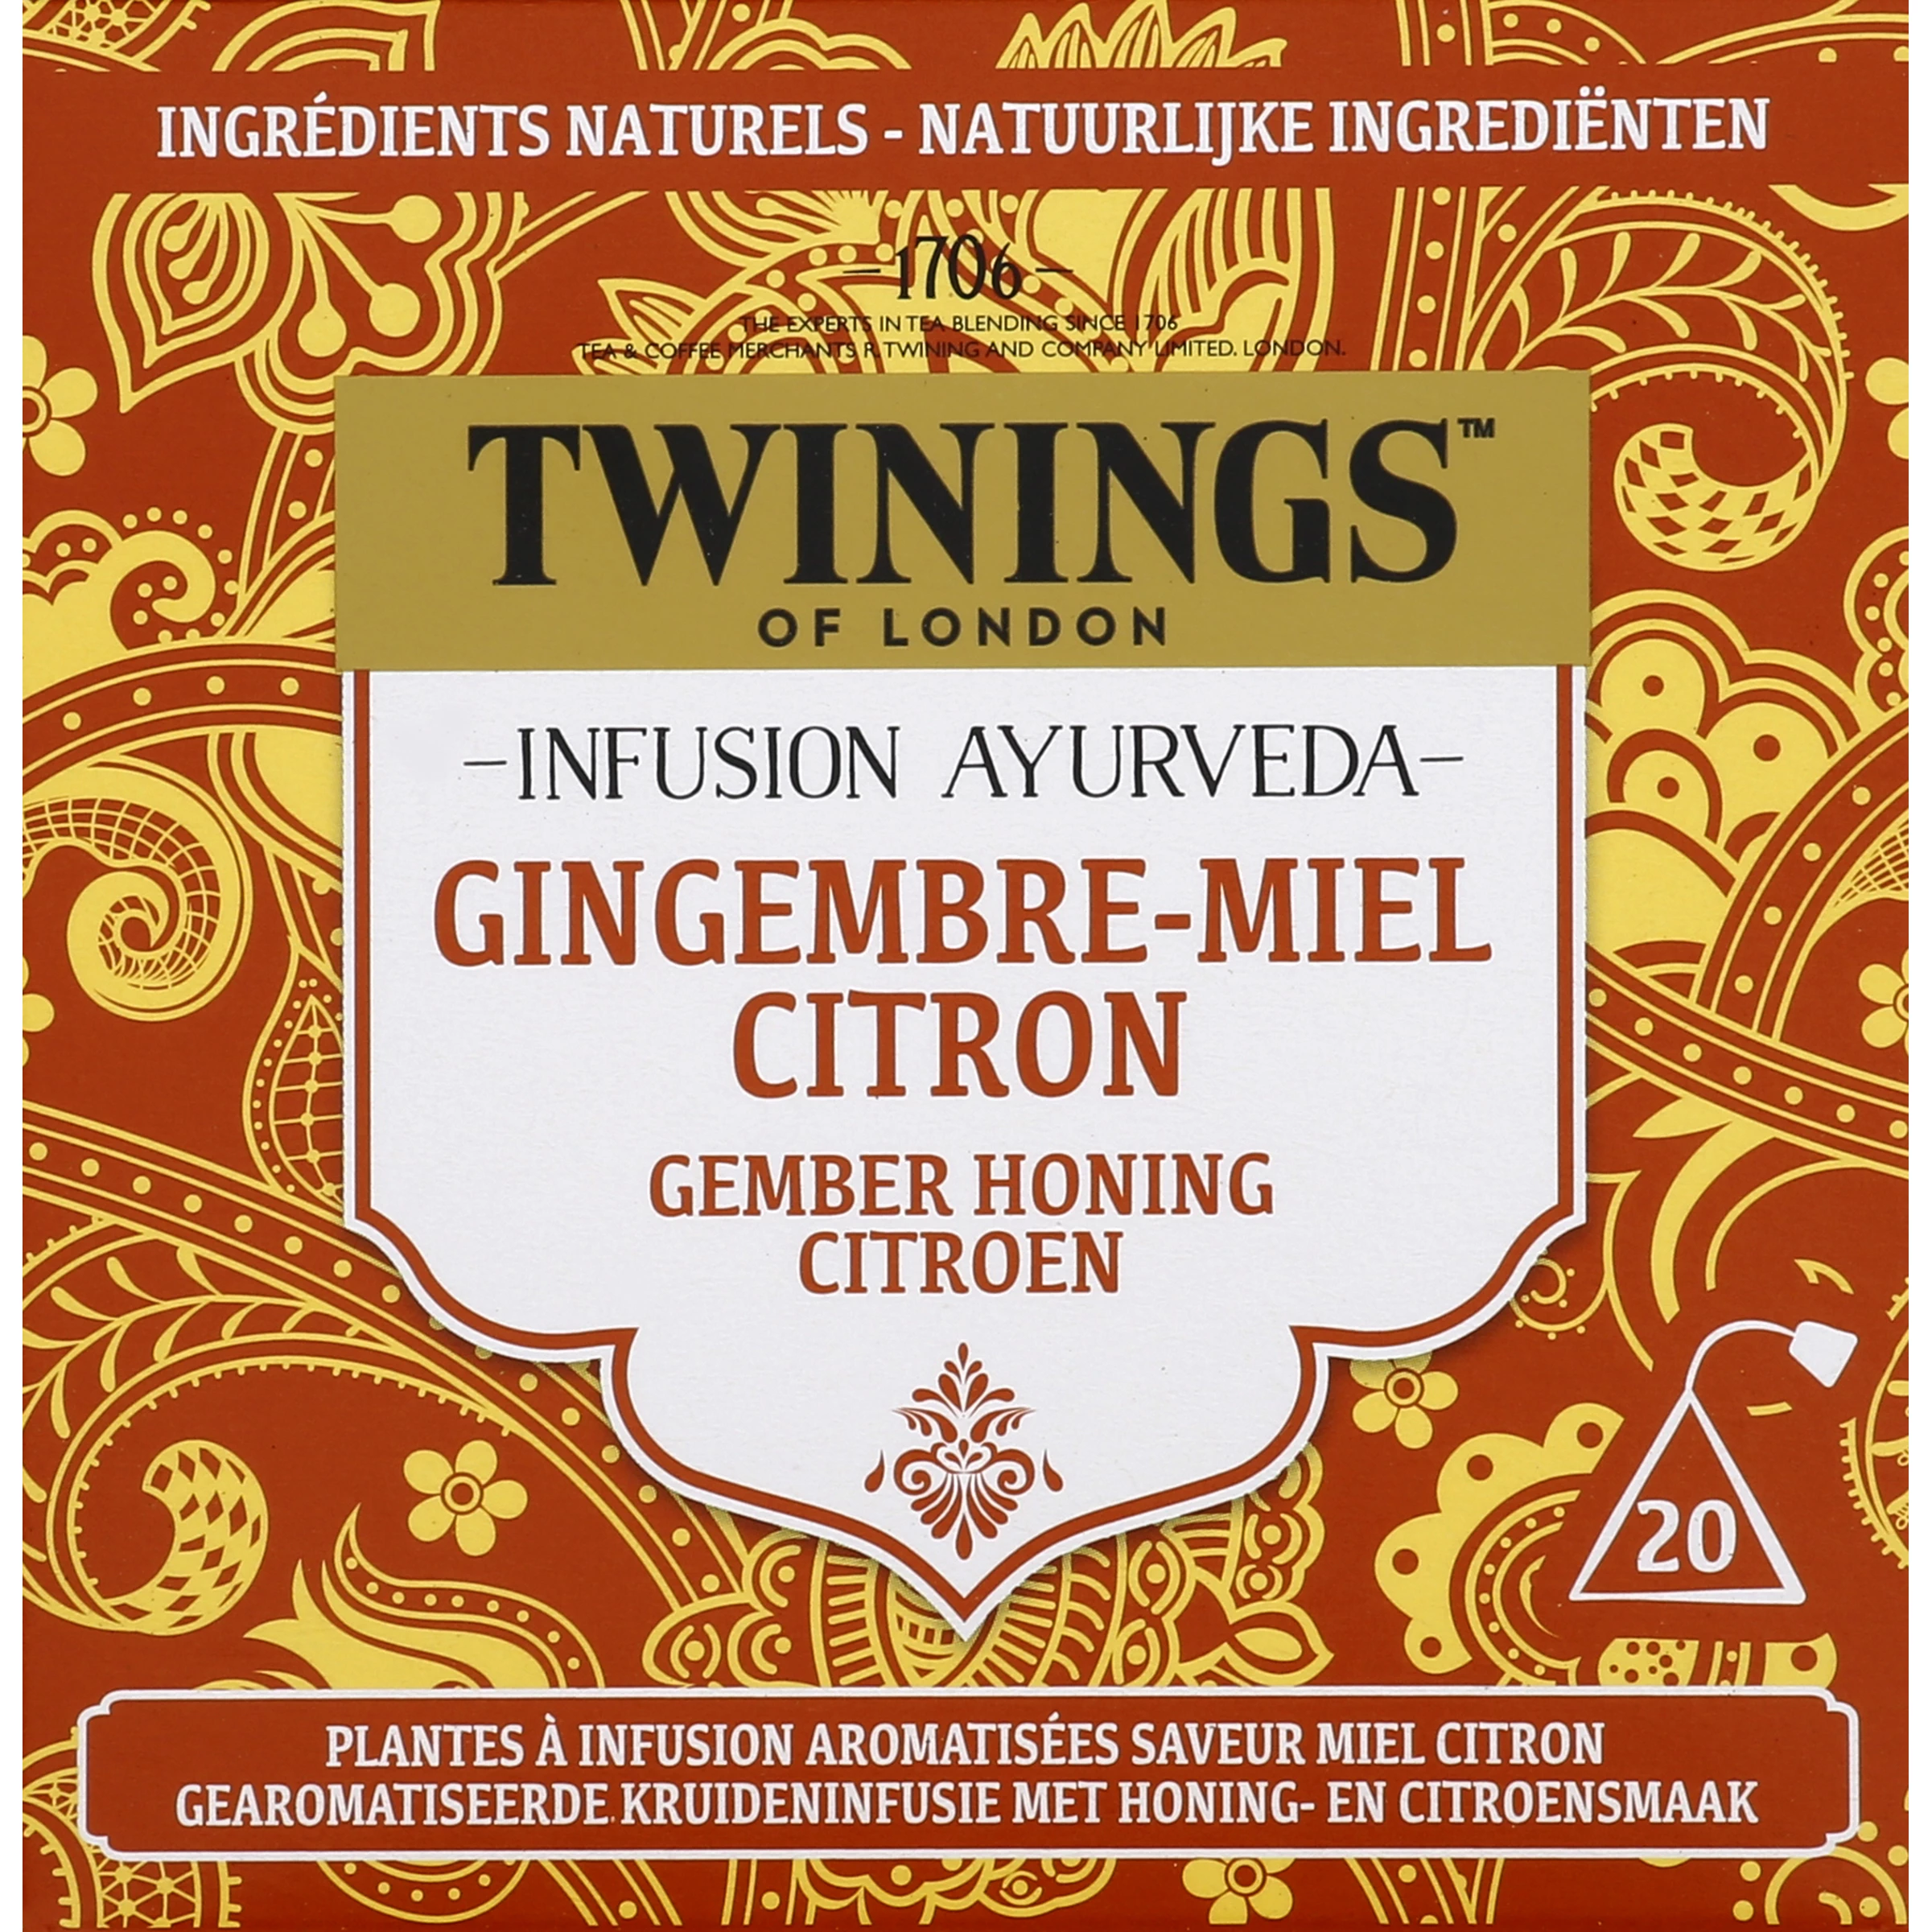 Infusion Ayurveda Gingembre, Miel, Citron x20, 32g - TWINNINGS